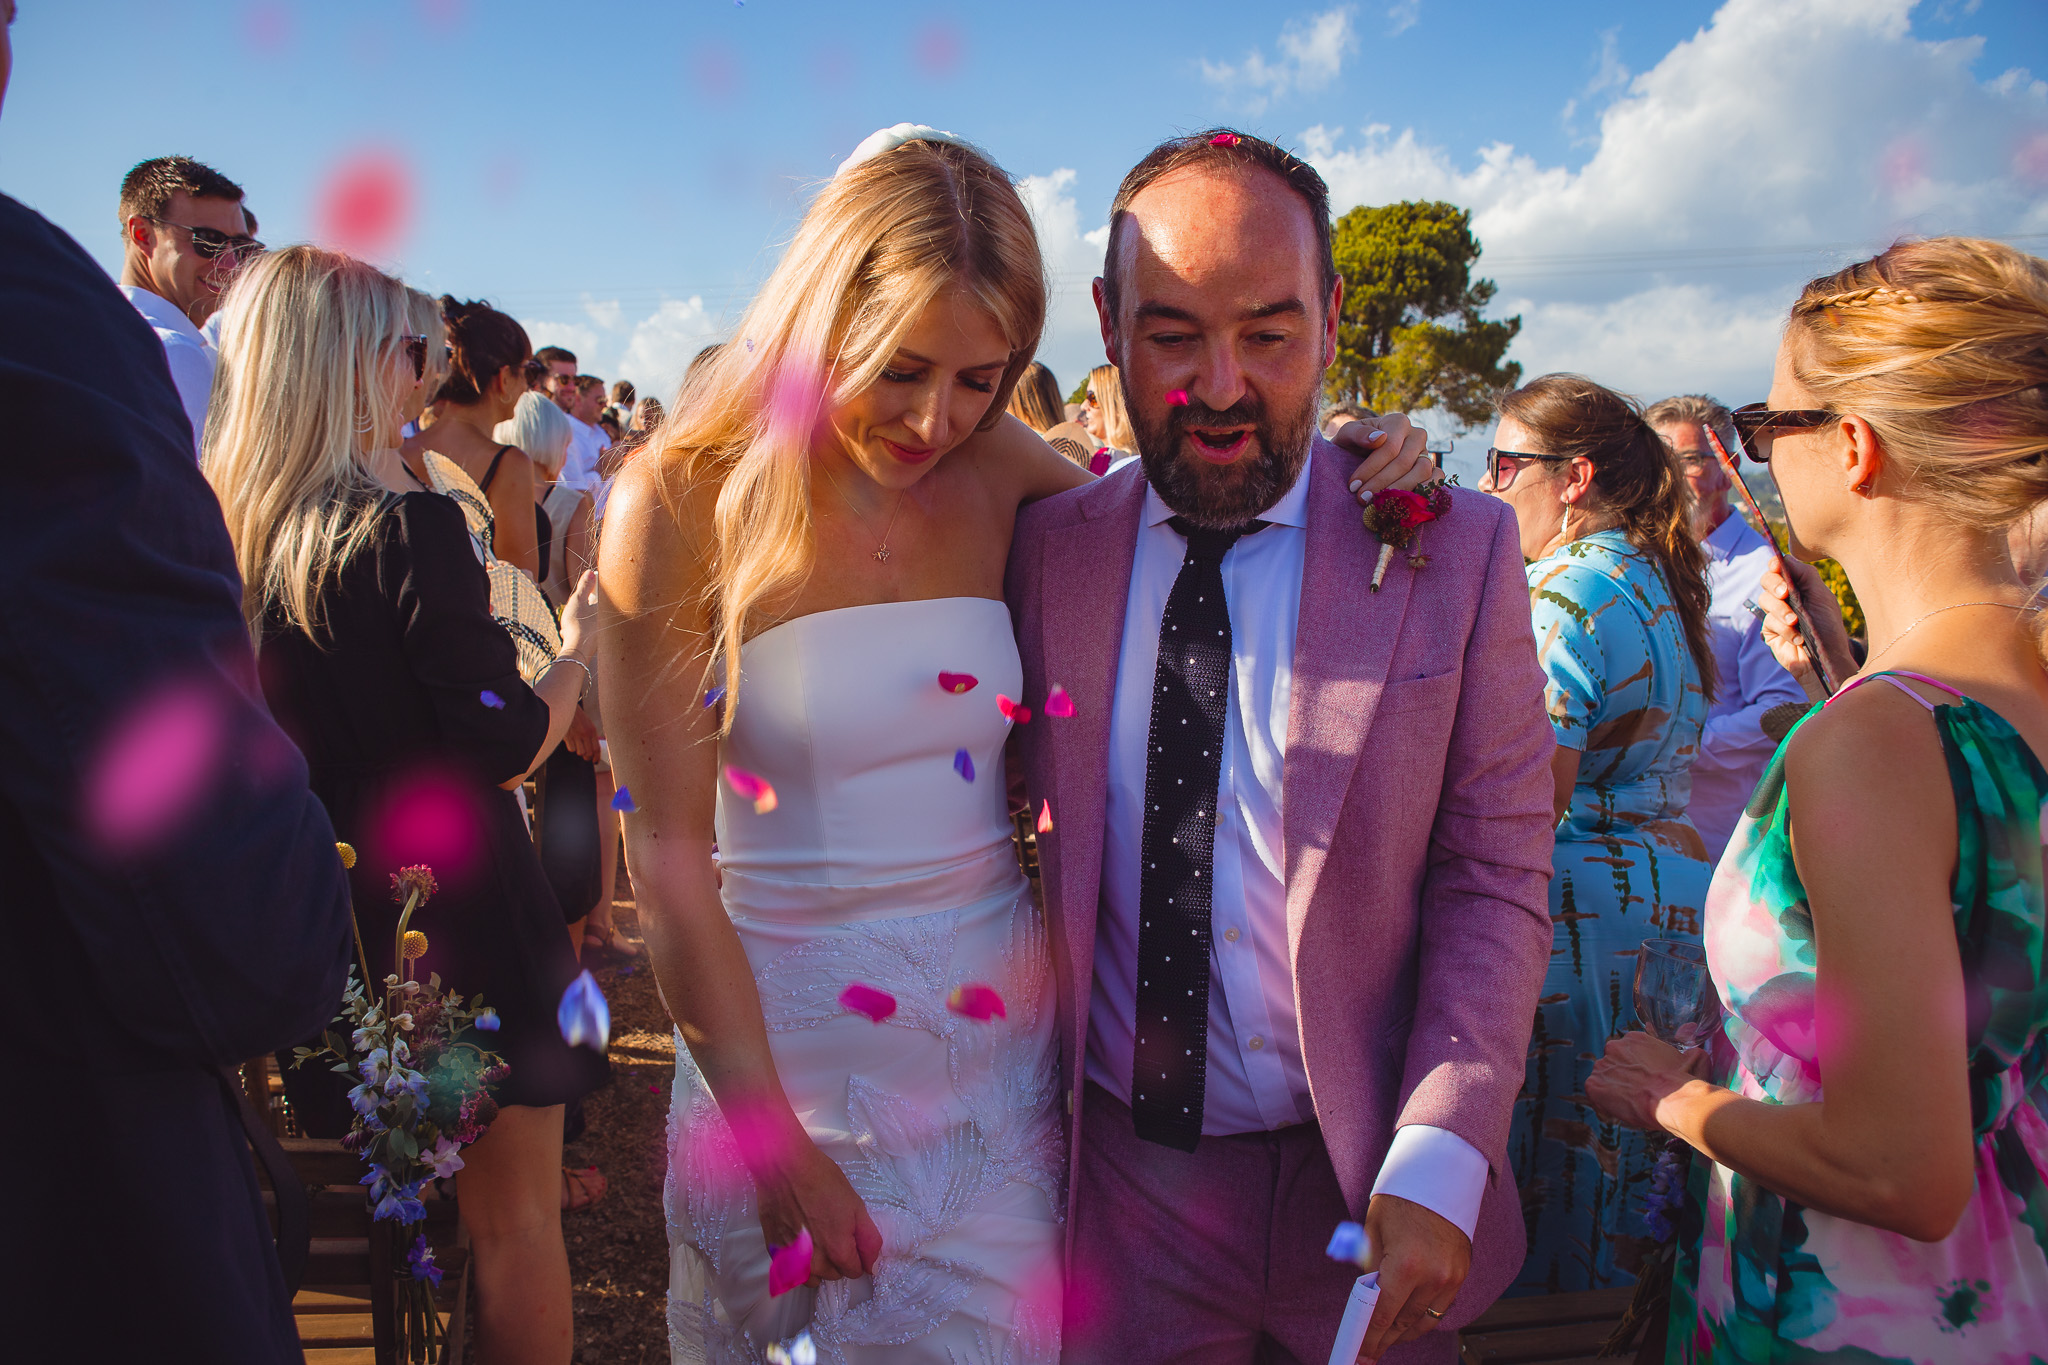 Bride and groom walk through pink confetti and their guests at the end of their wedding ceremony